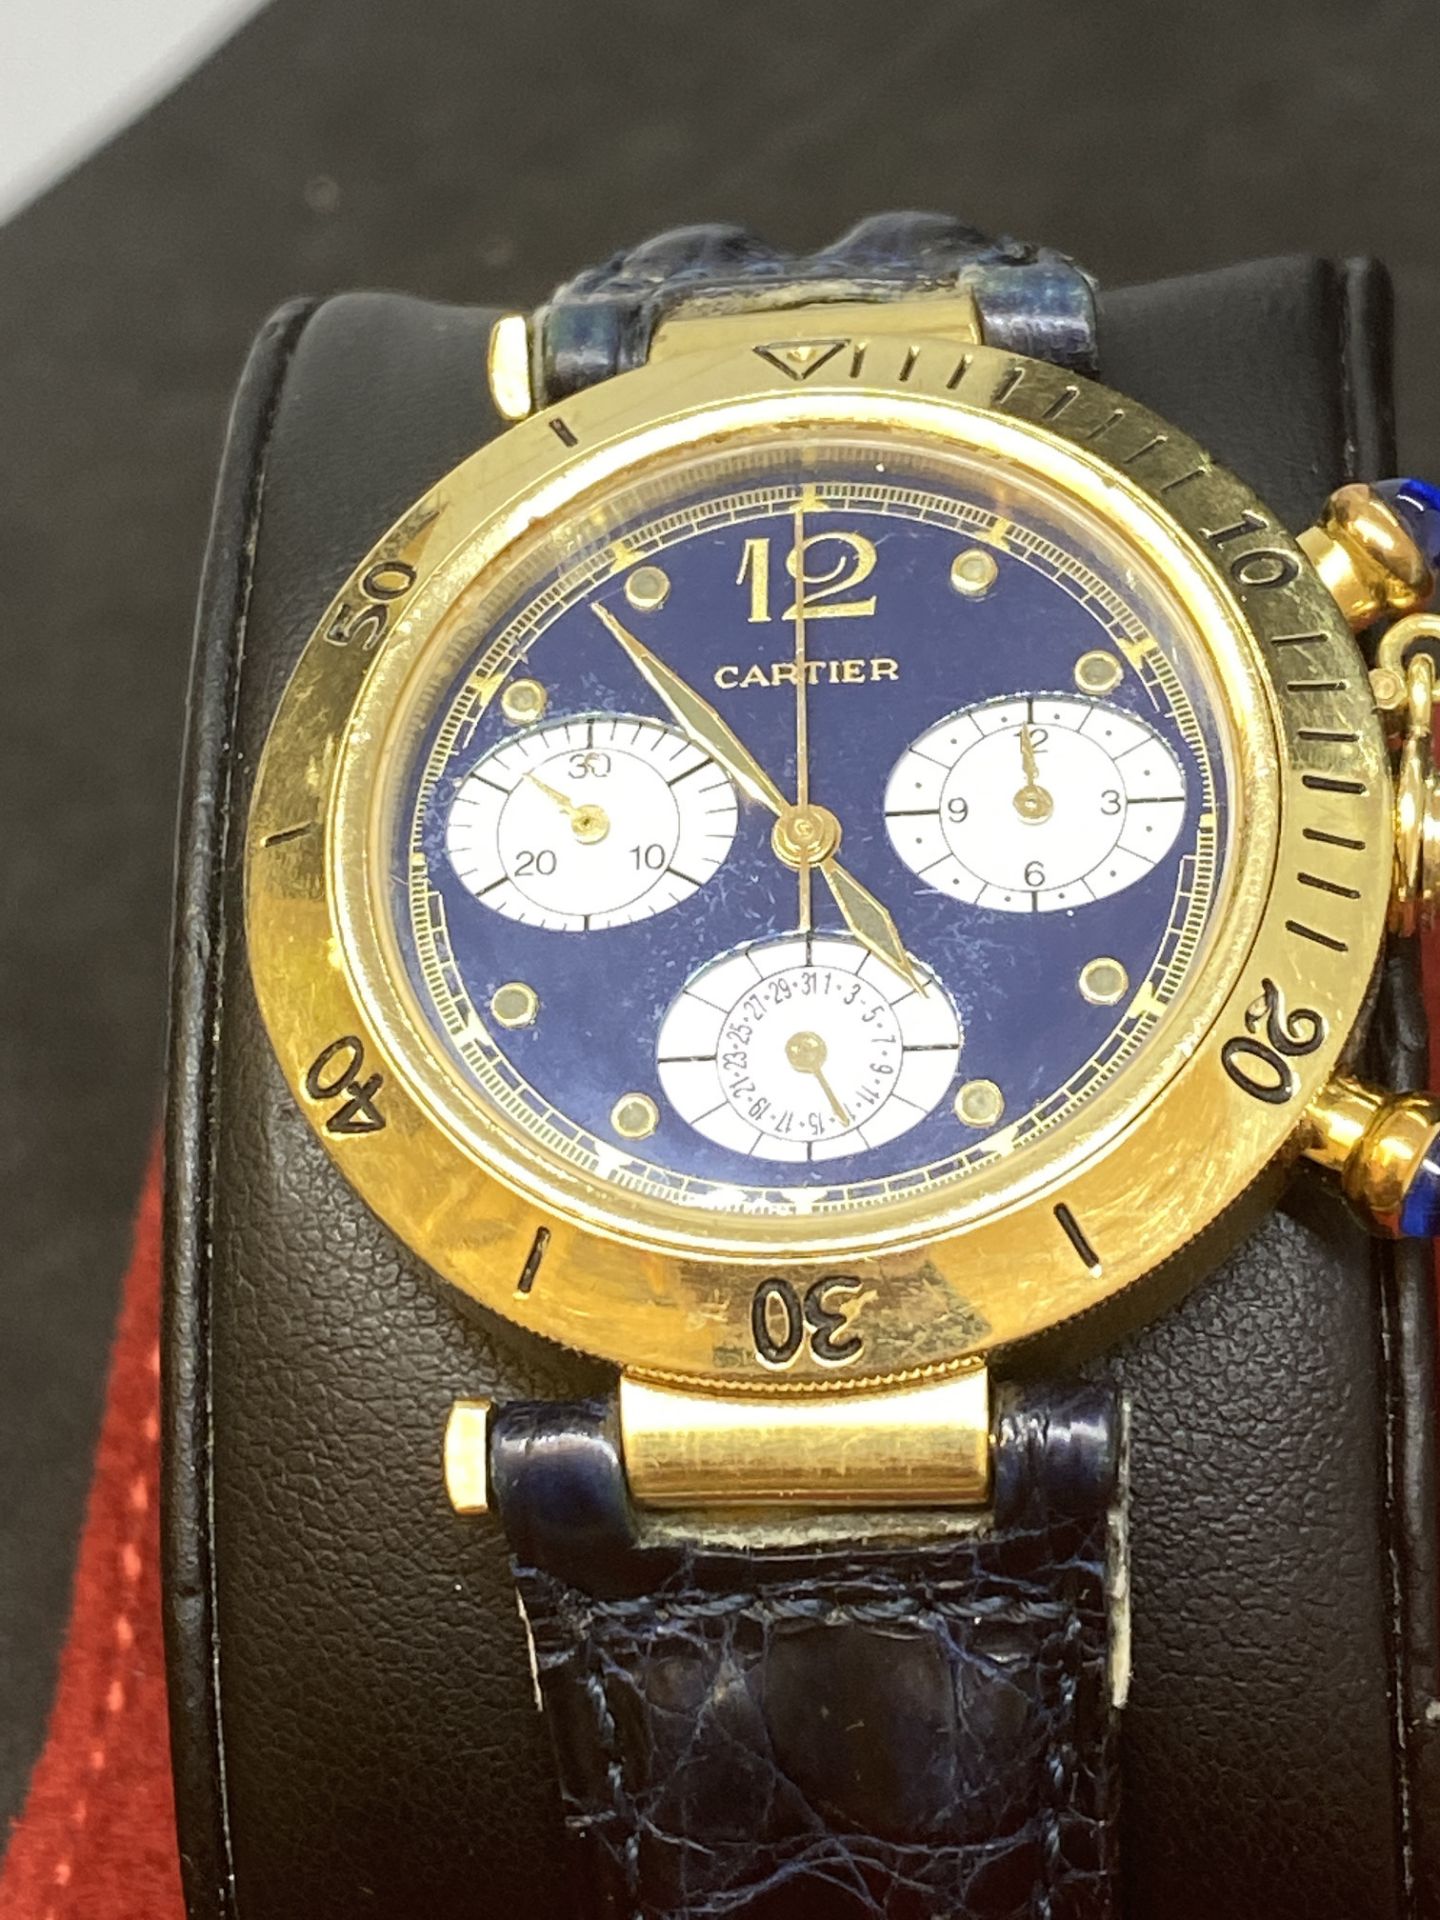 CARTIER CHRONO 18k GOLD WATCH - Image 6 of 12